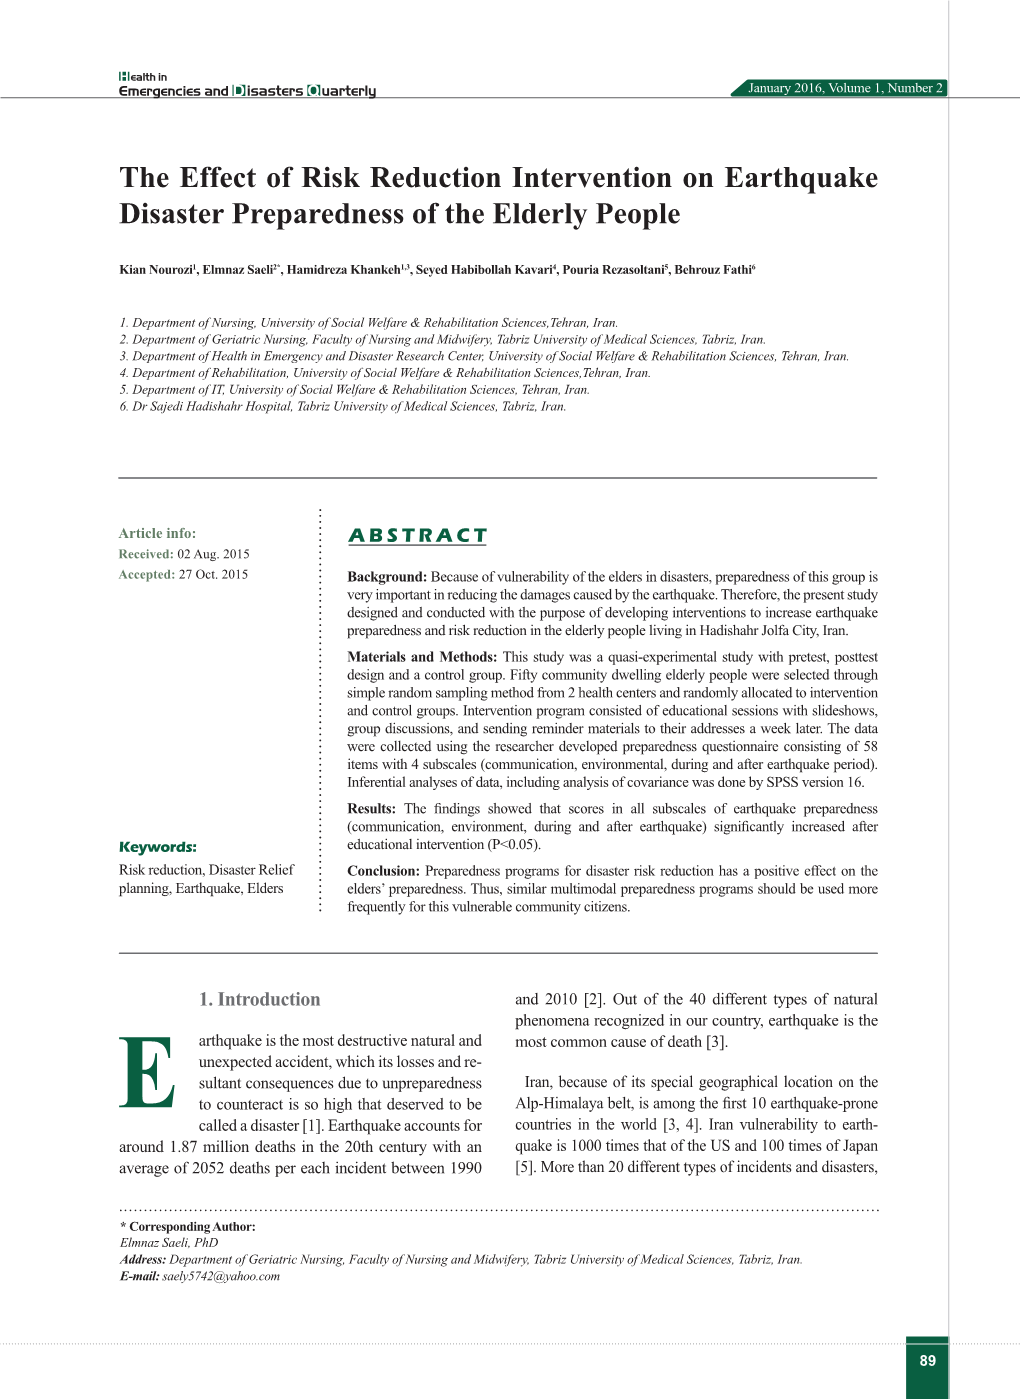 The Effect of Risk Reduction Intervention on Earthquake Disaster Preparedness of the Elderly People